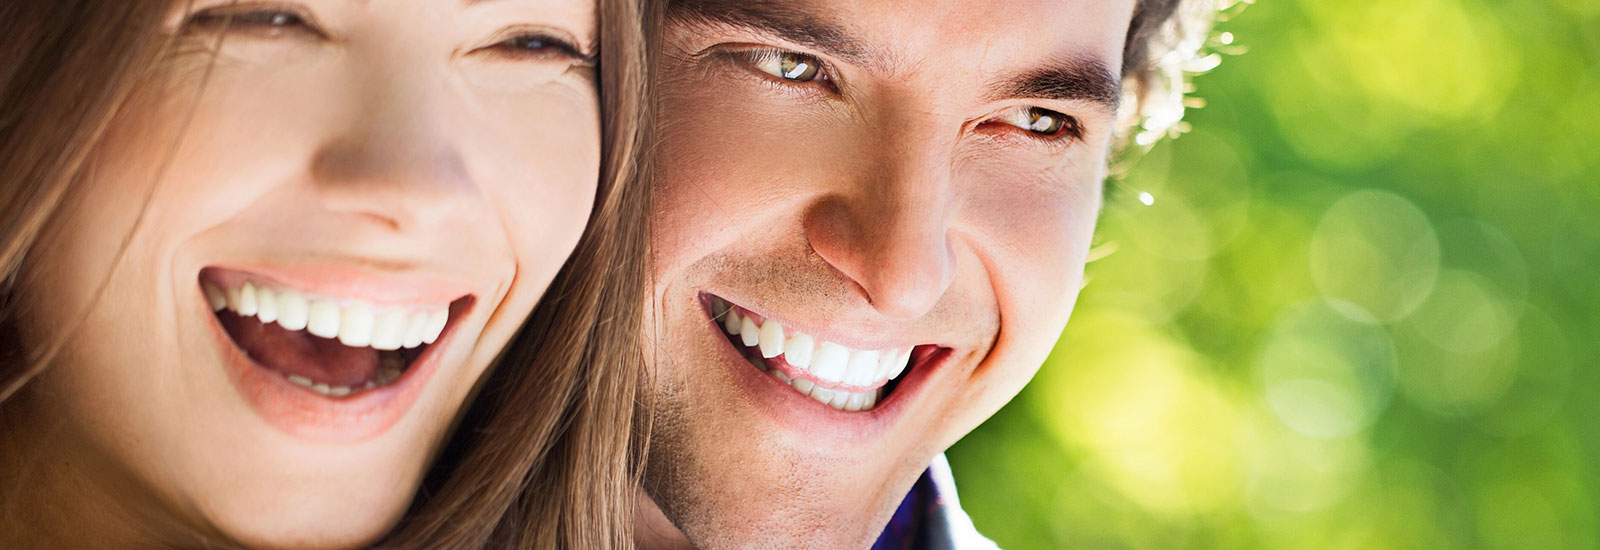 Benefit from our blend of comprehensive, general dental services and advanced, quality care